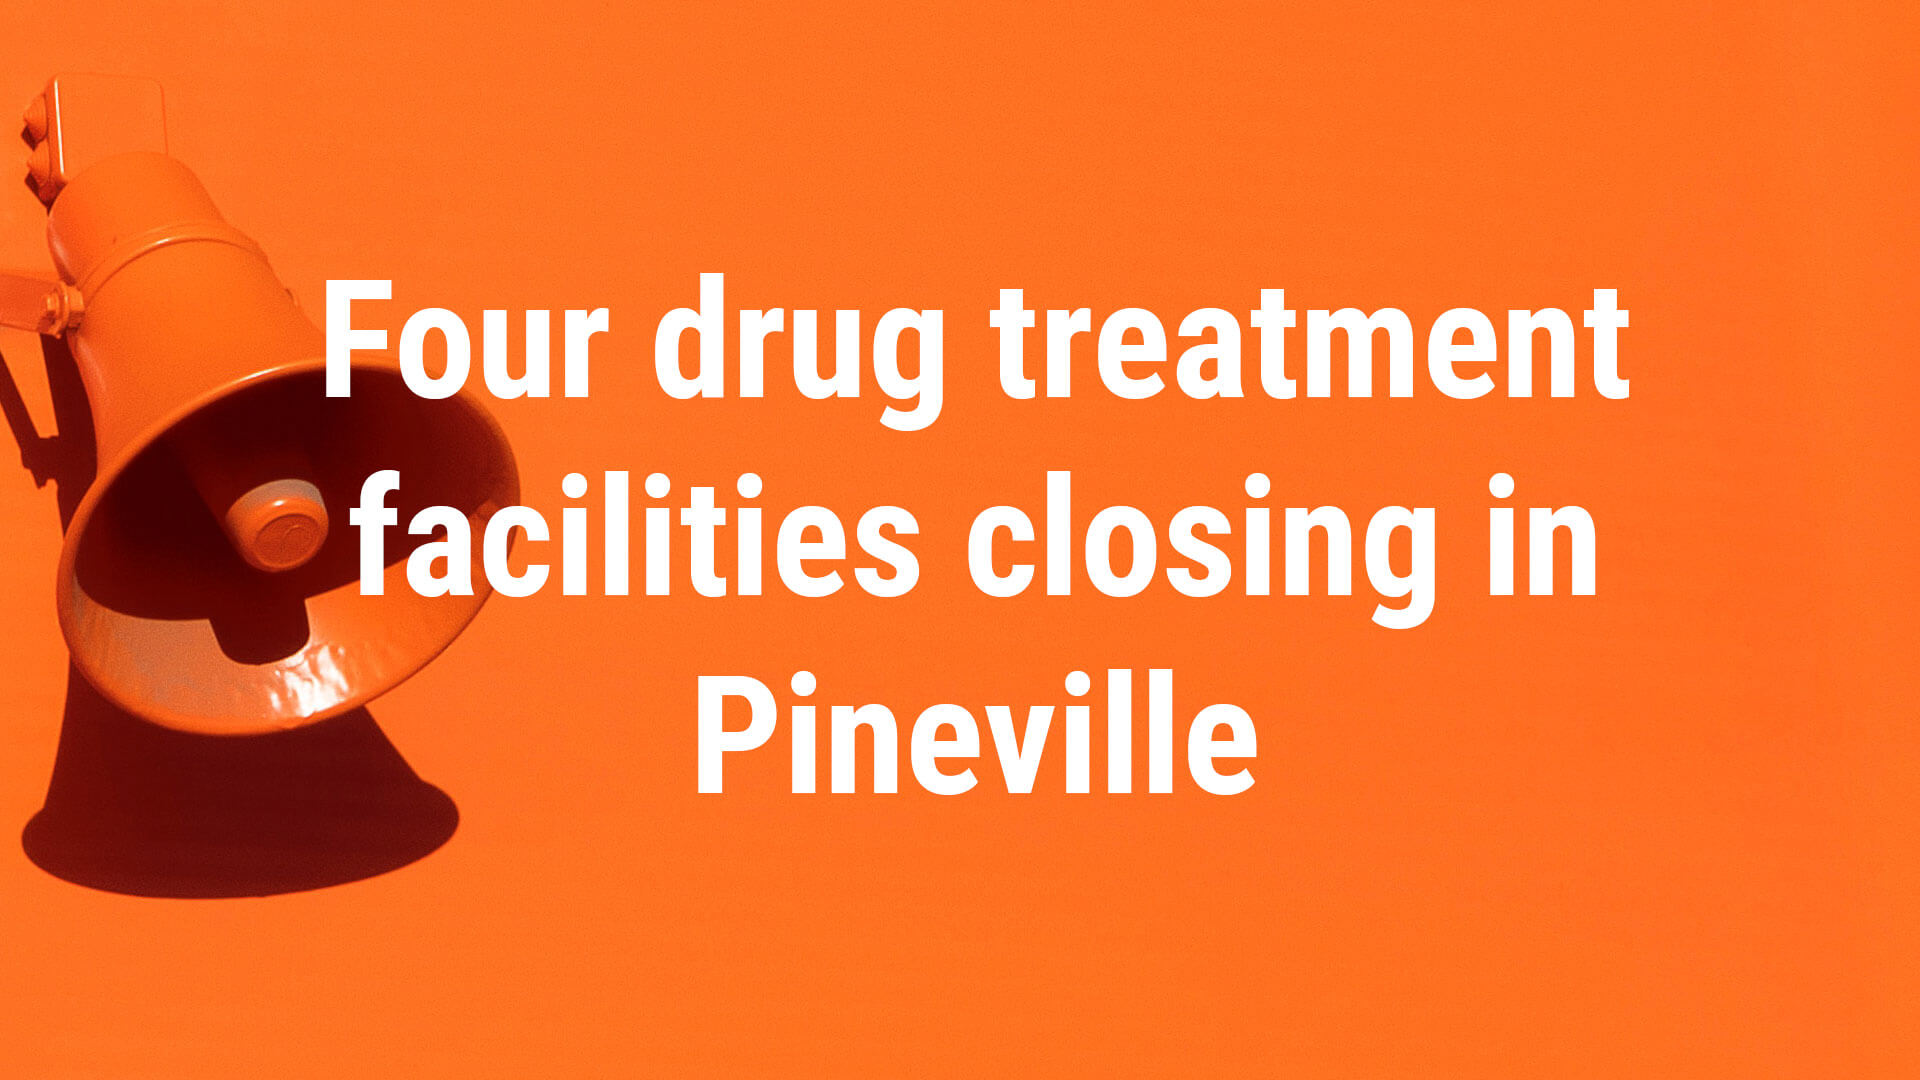 Four drug treatment facilities closing in Pineville